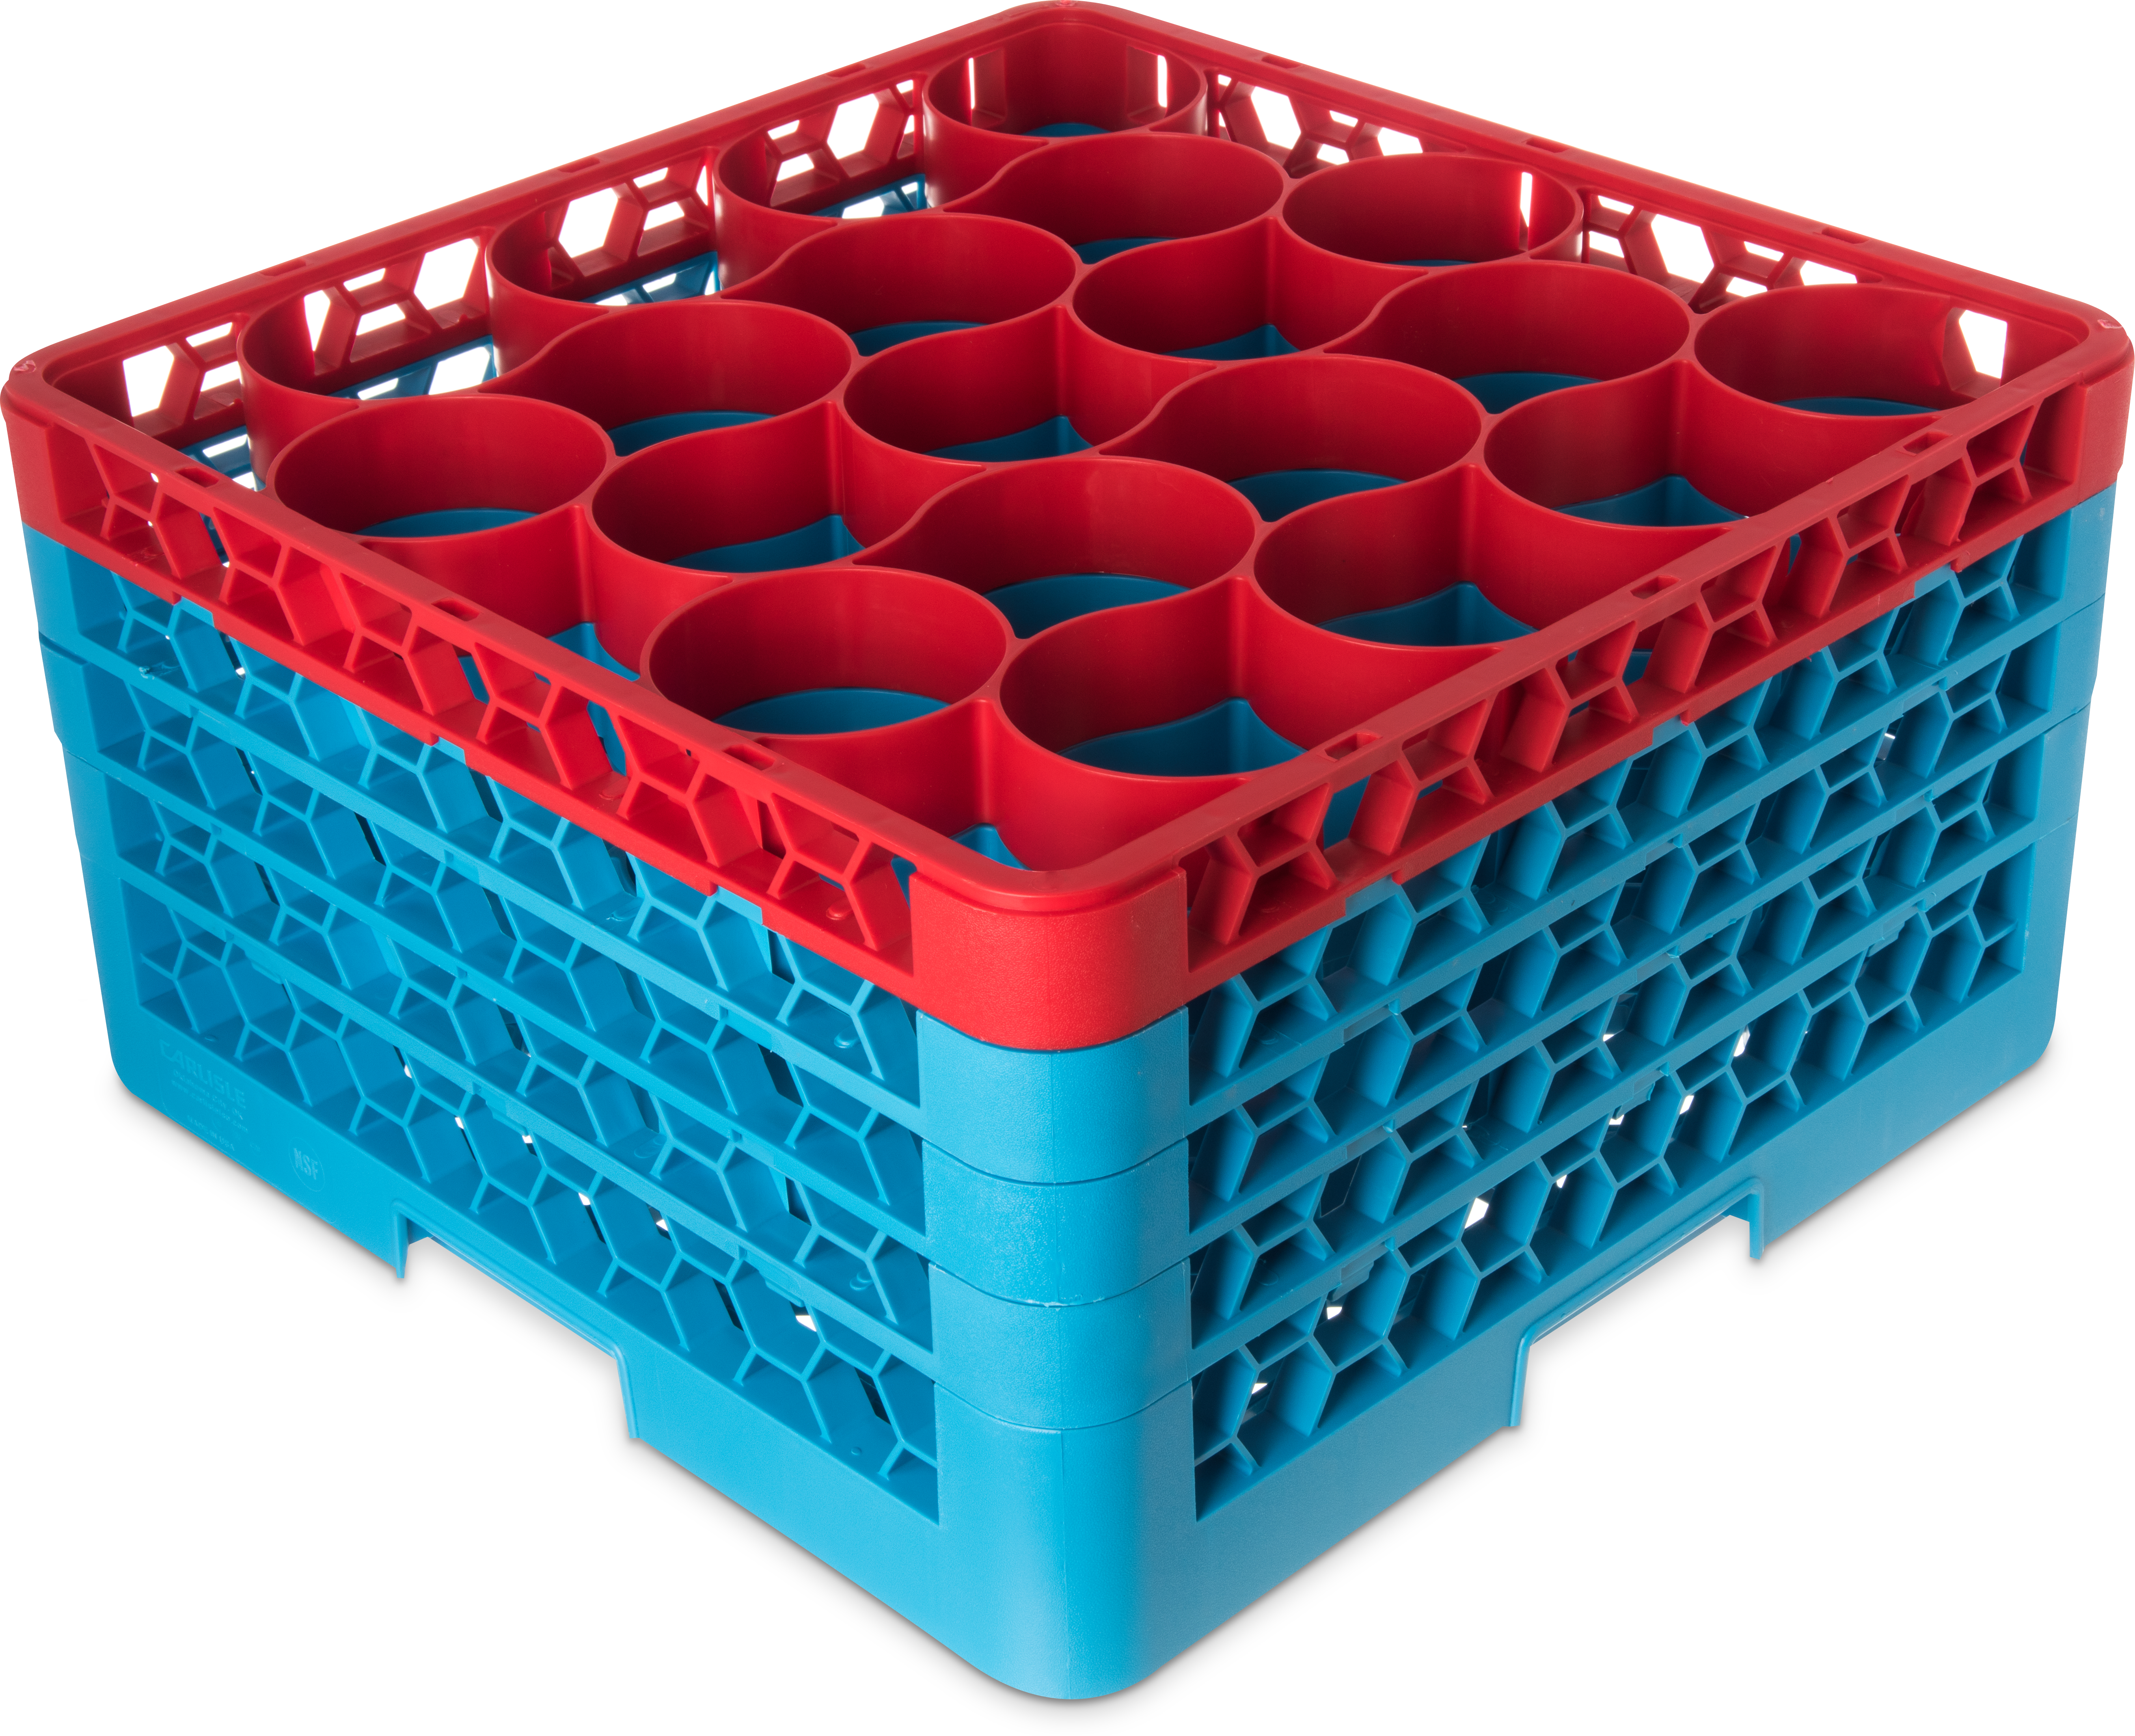 OptiClean NeWave Color-Coded Glass Rack with Four Extenders 20 Compartment - Red-Carlisle Blue